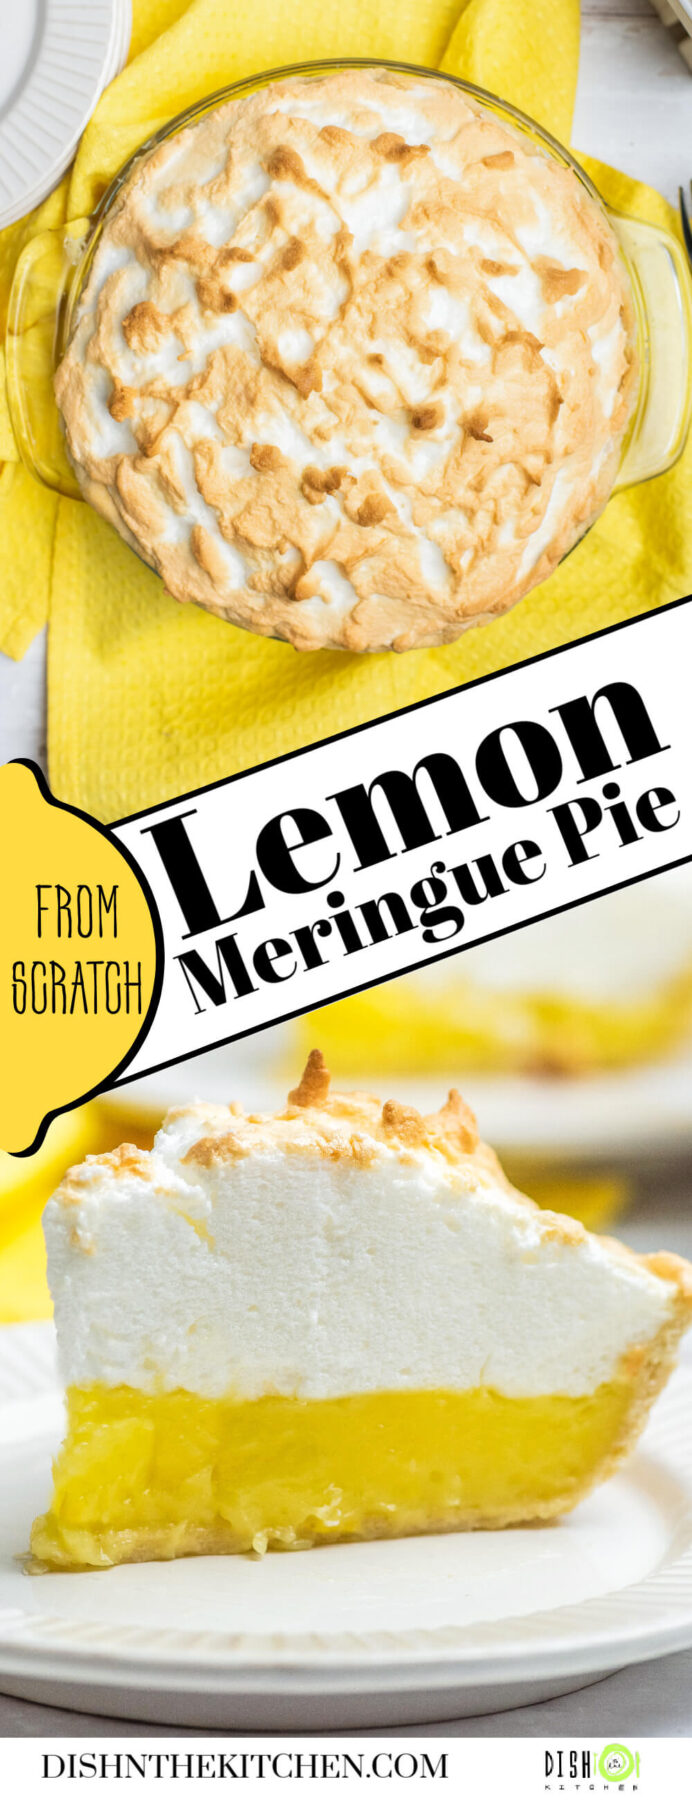 Pinterest featuring a whole Lemon Meringue pie with a browned top and a slice of pie with the layers showing.